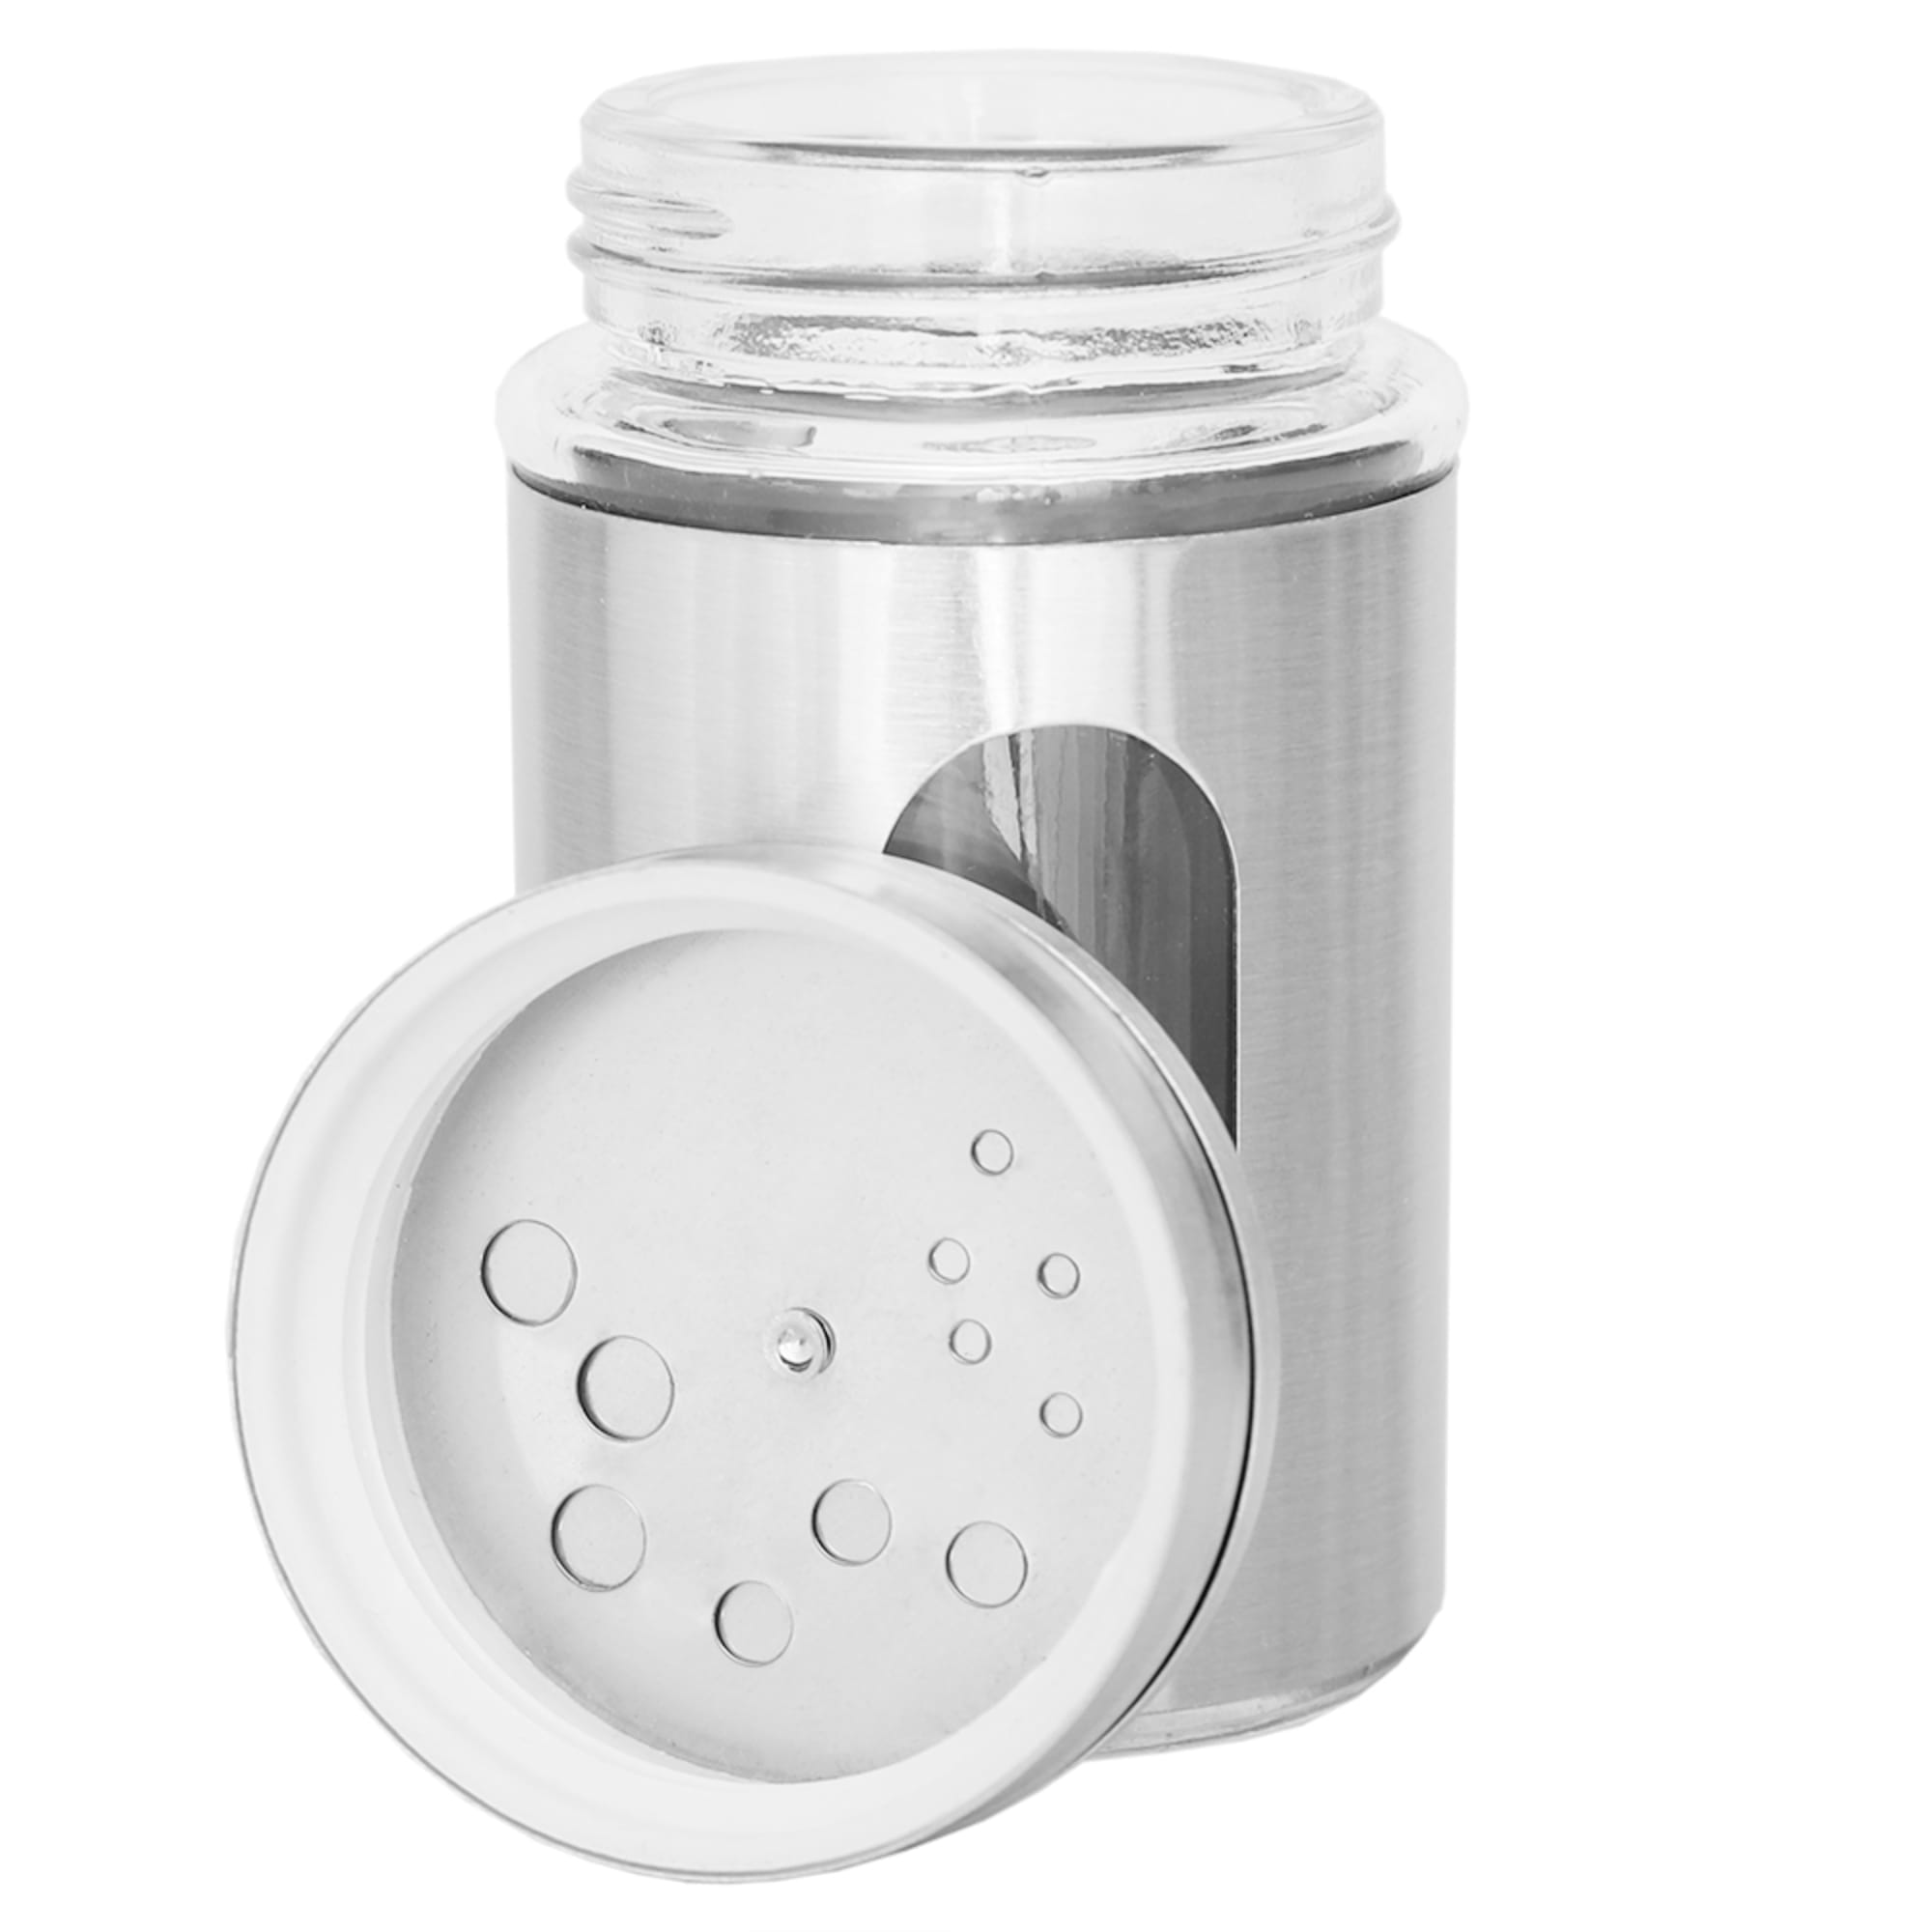 Home Basics 4 oz. Stainless Steel Shaker with Glass Window, Silver $1.25 EACH, CASE PACK OF 48